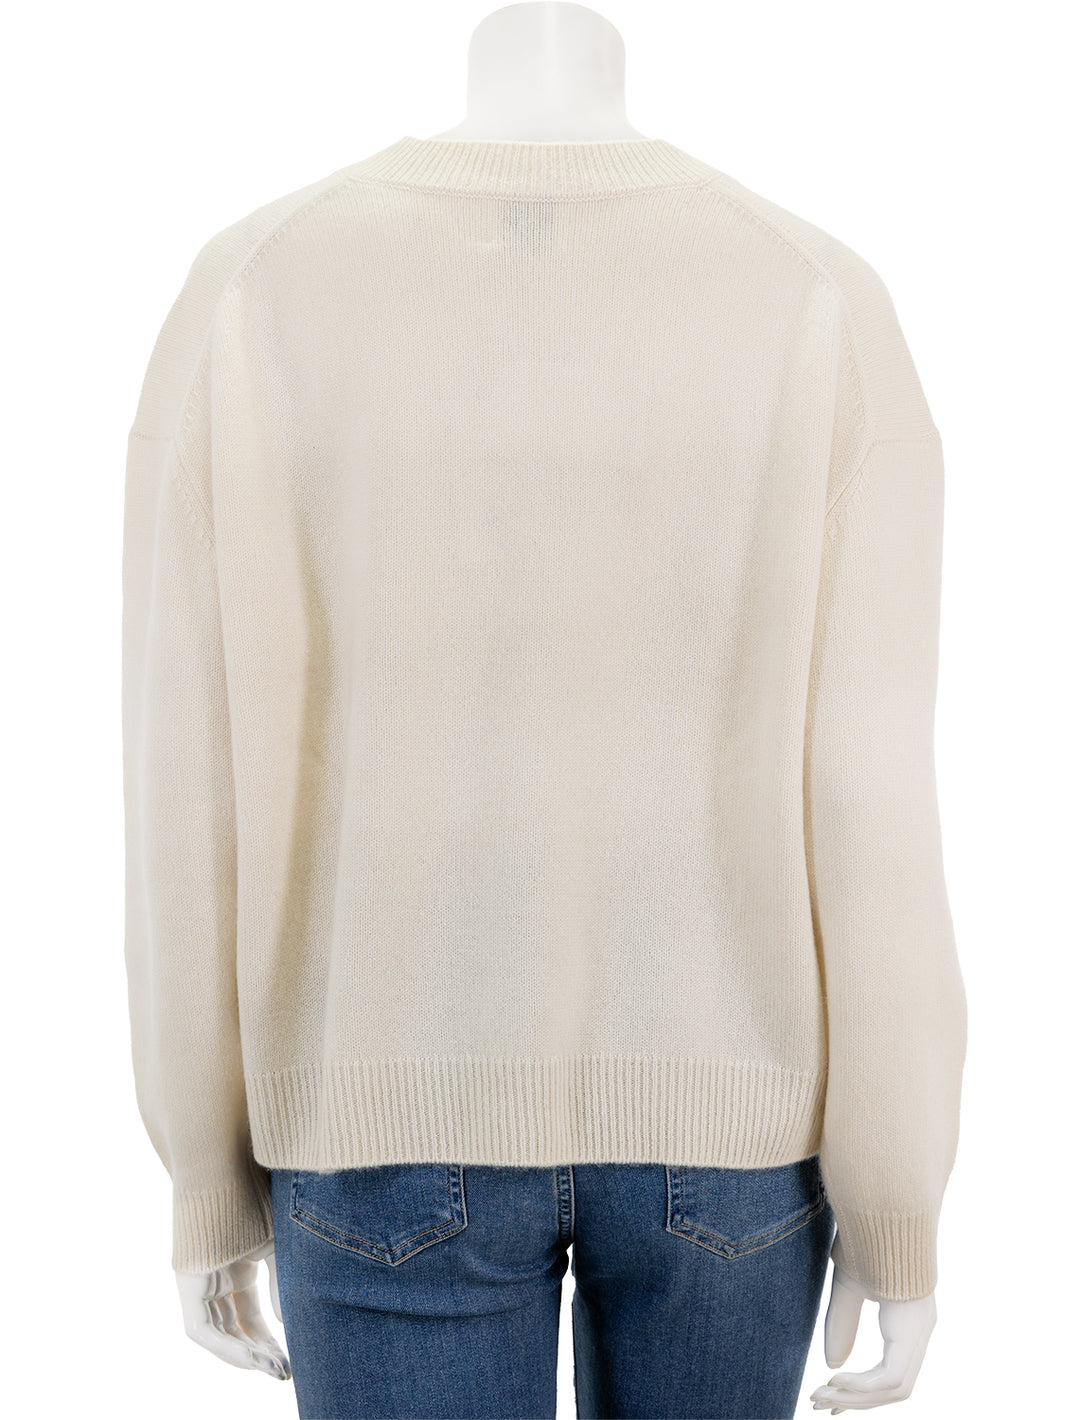 Back view of Anine Bing's lee sweater in ivory.